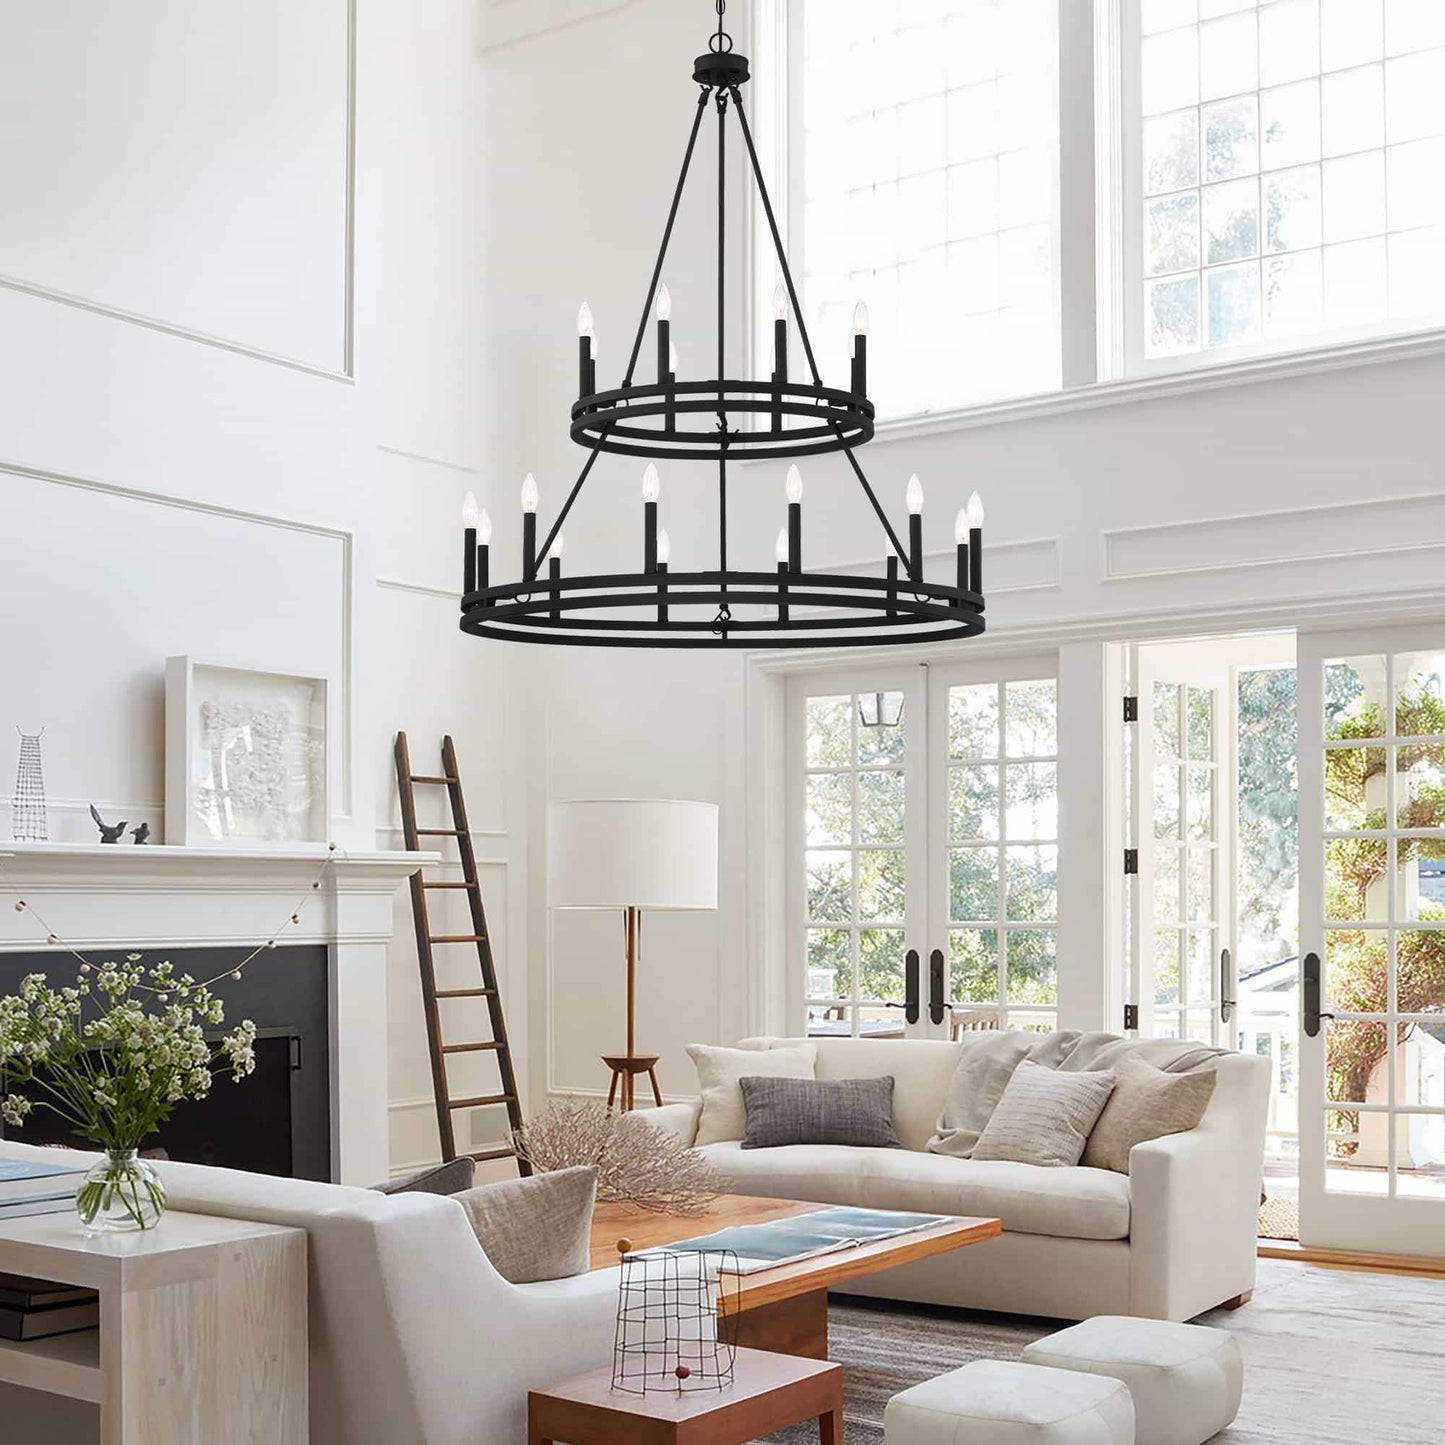 20 light candle style wagon wheel tiered chandelier (2) by ACROMA